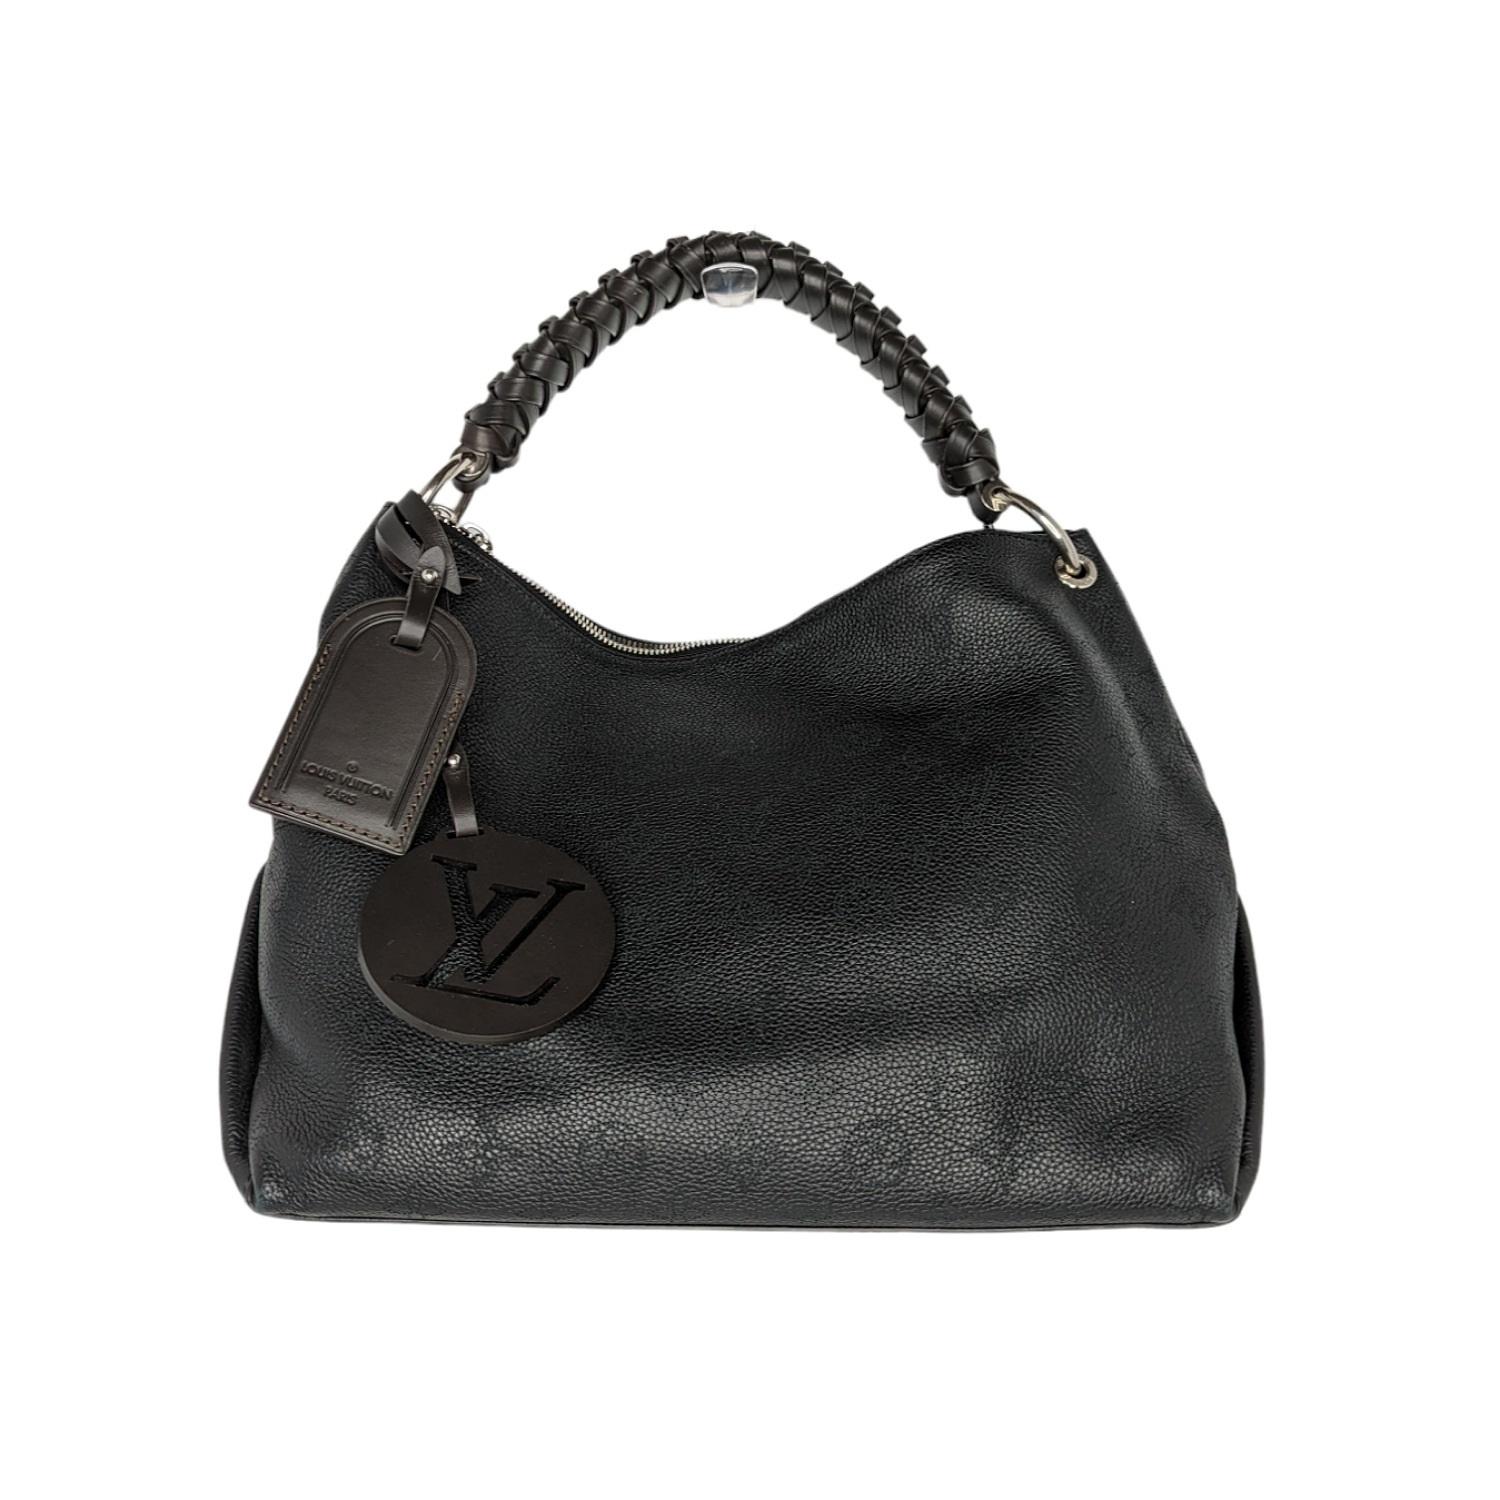 Louis Vuitton Monogram Mahina Beaubourg MM Hobo In Excellent Condition For Sale In Scottsdale, AZ